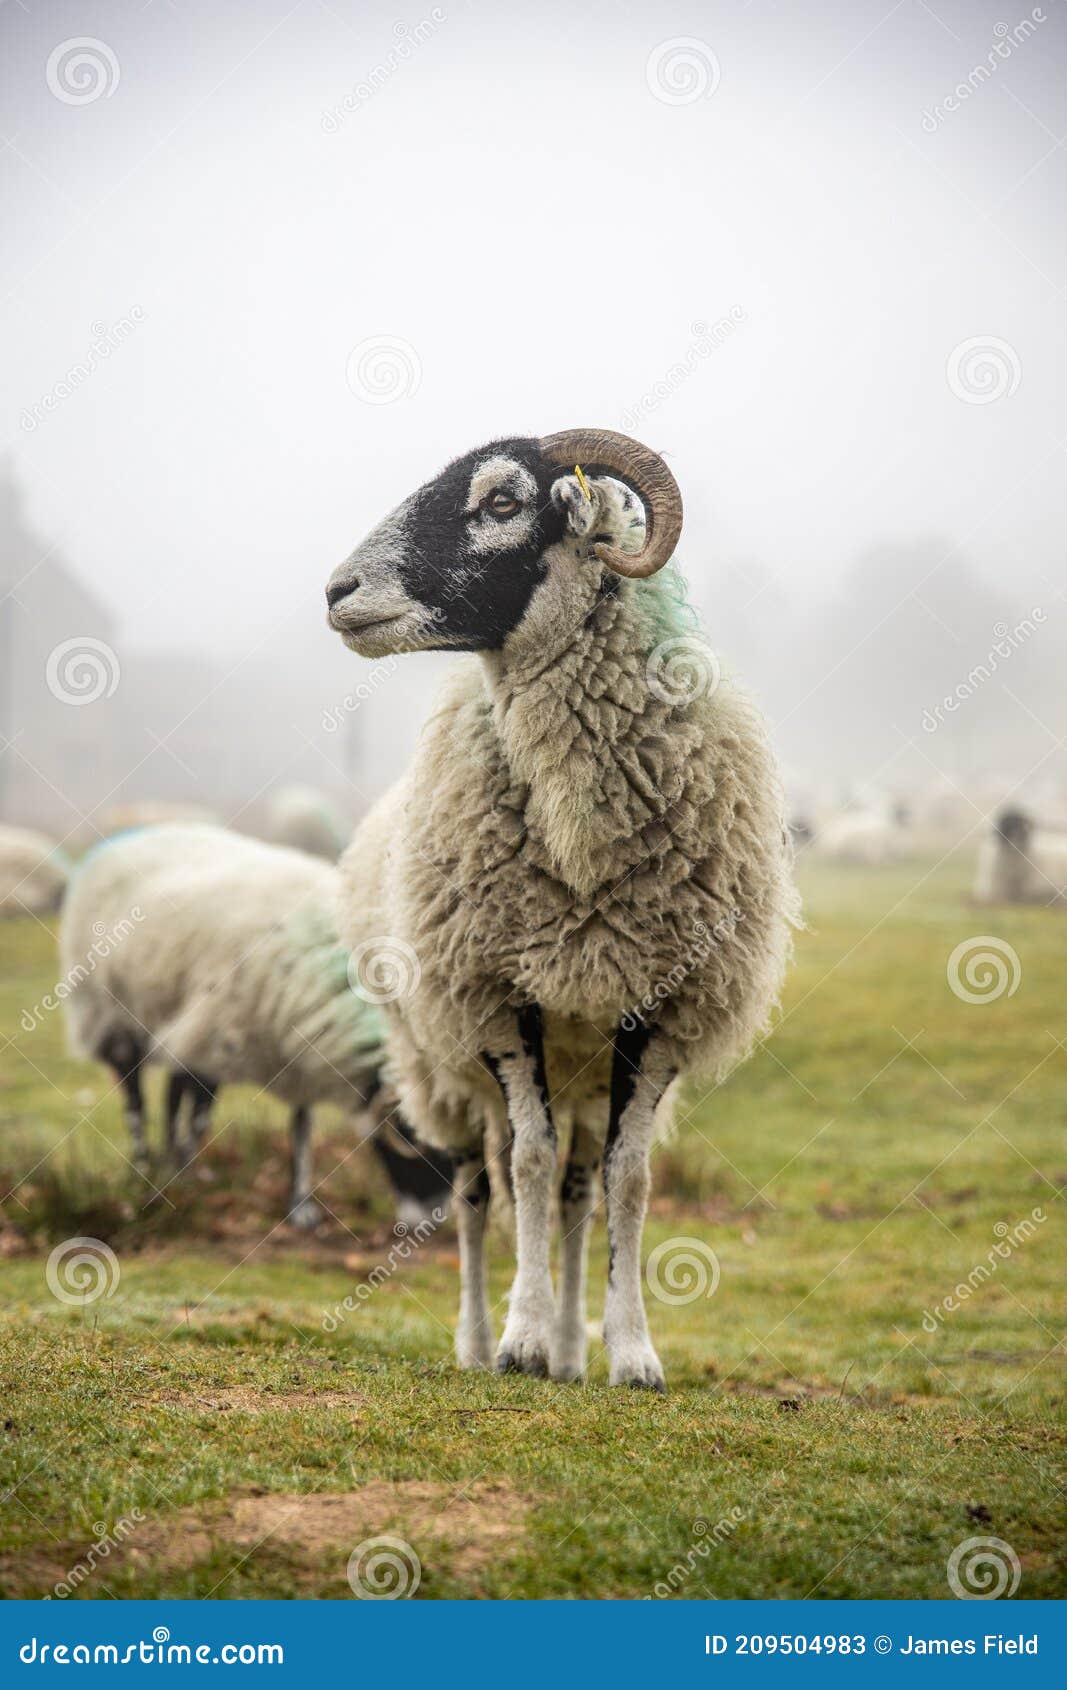 Shot of a Ram Posing for the Camera Stock Image - Image of countryside,  staring: 209504983